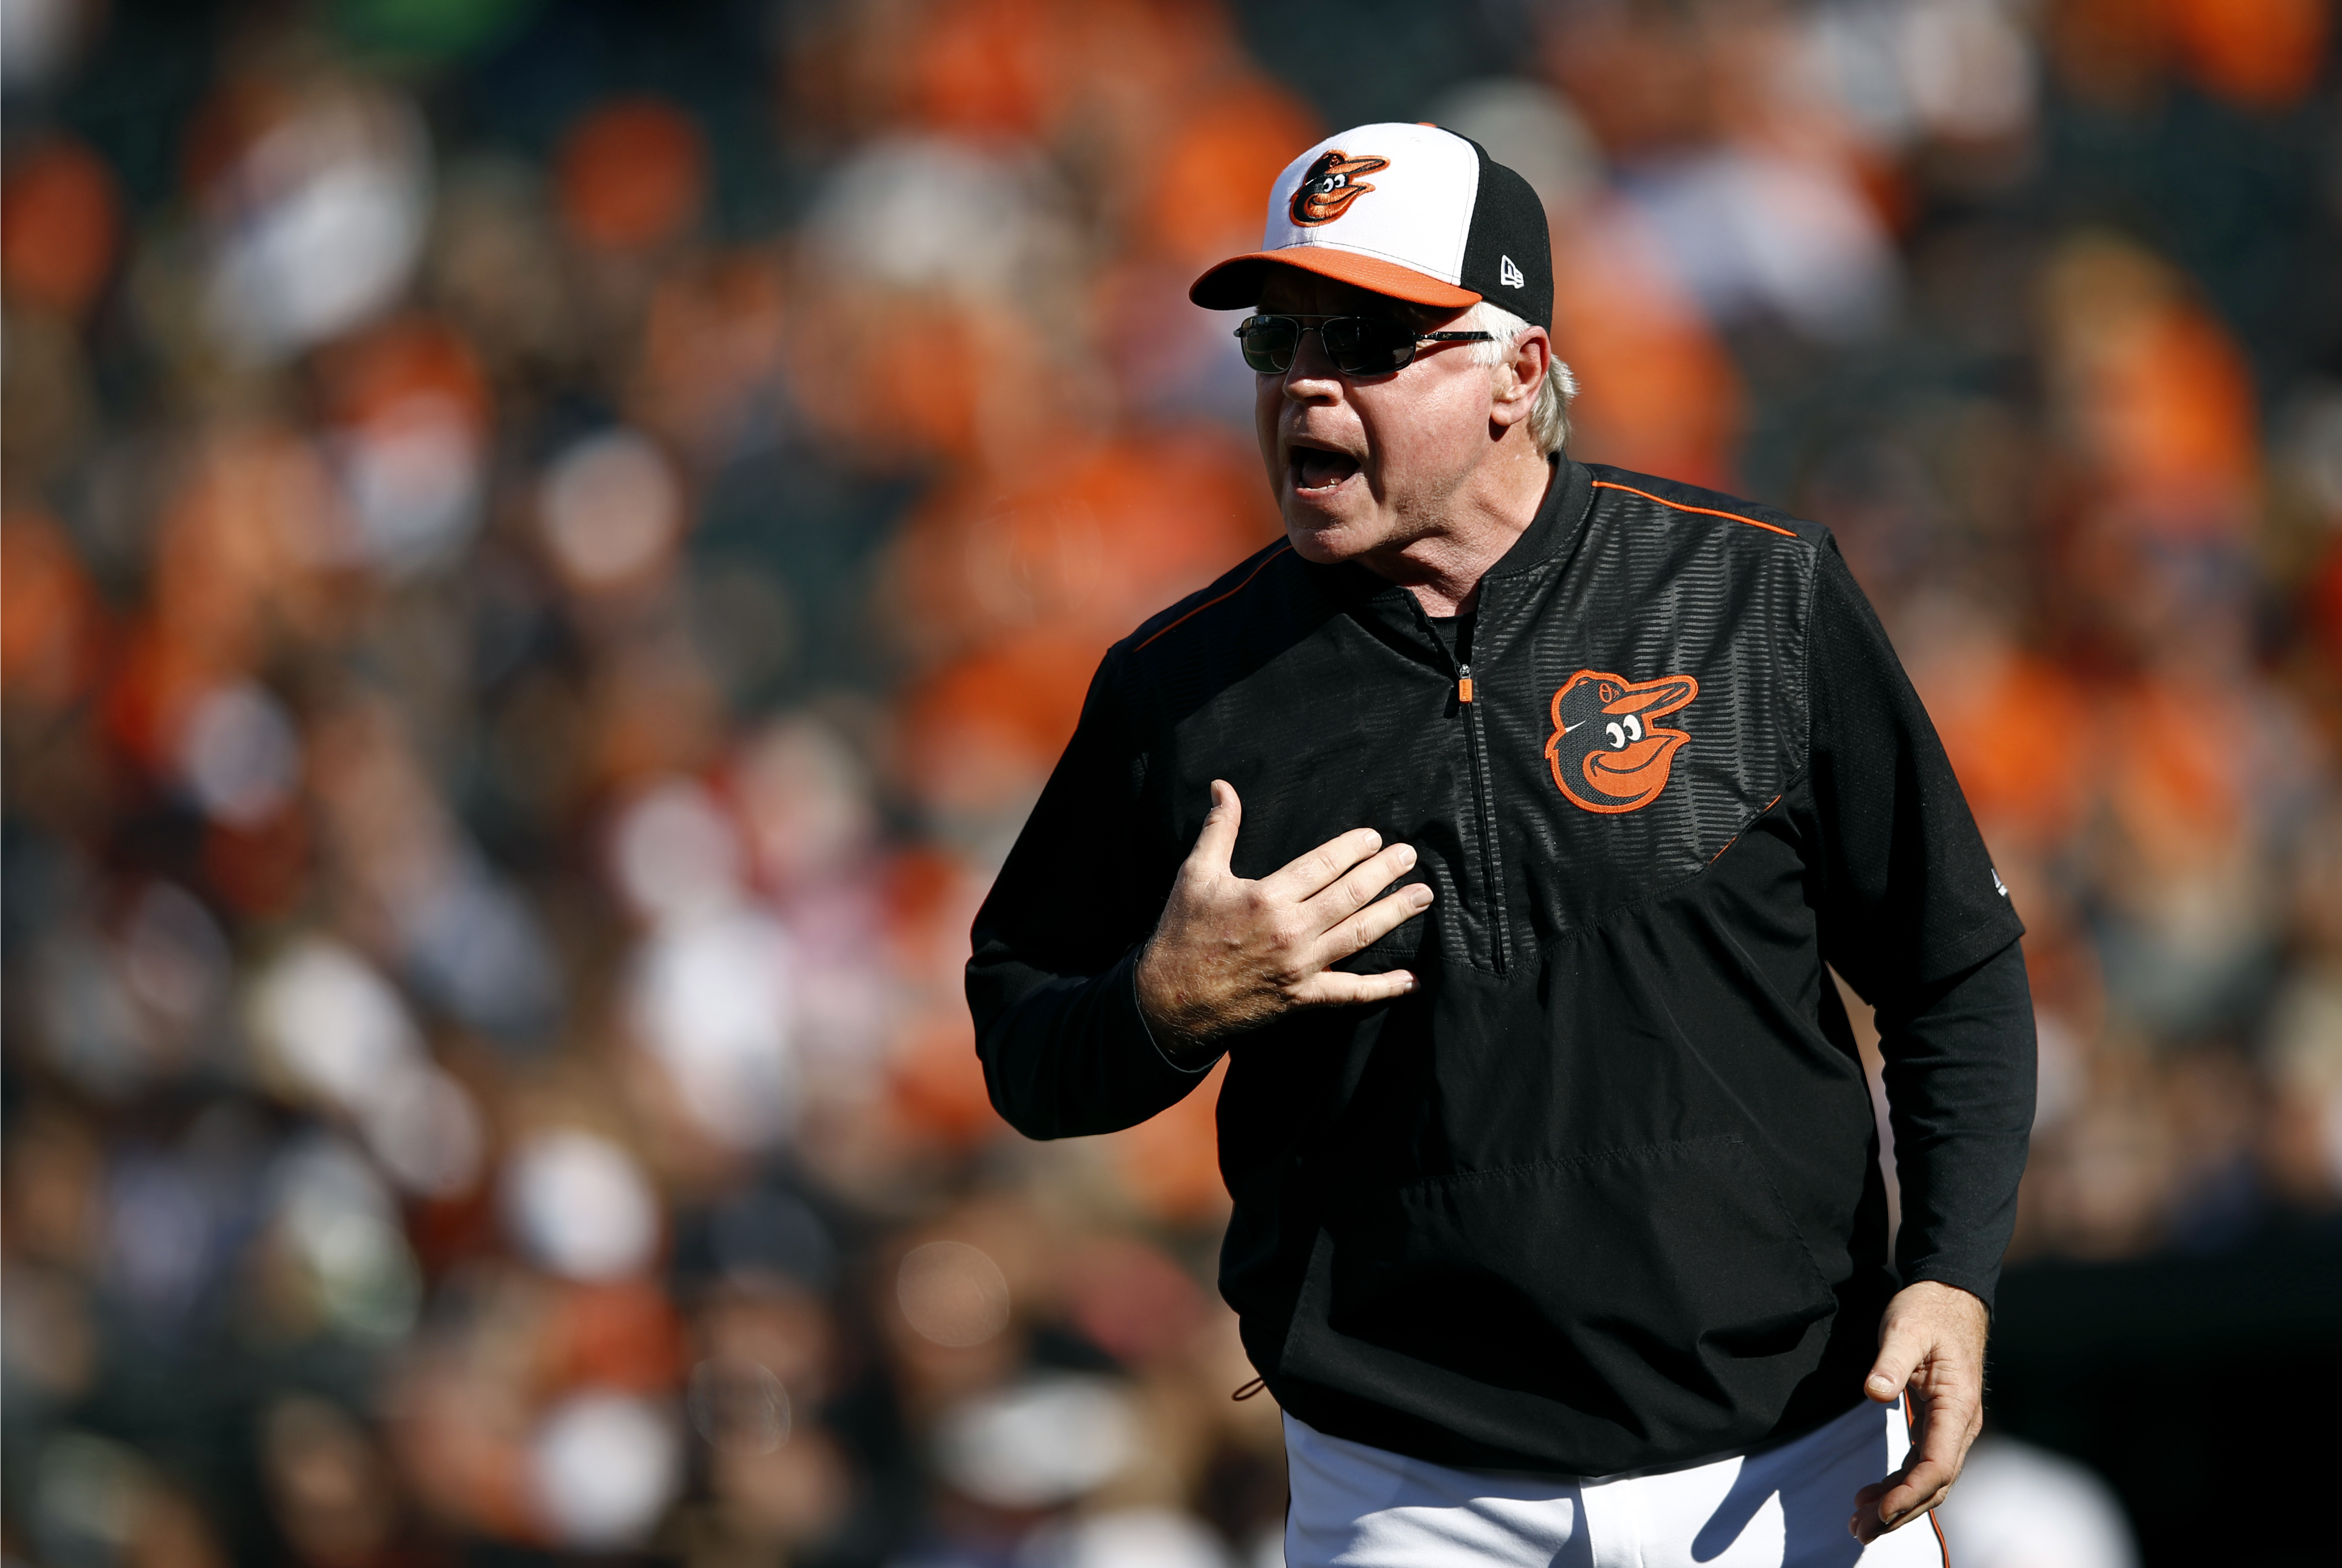 Yankees should bring Buck Showalter home to help clean up